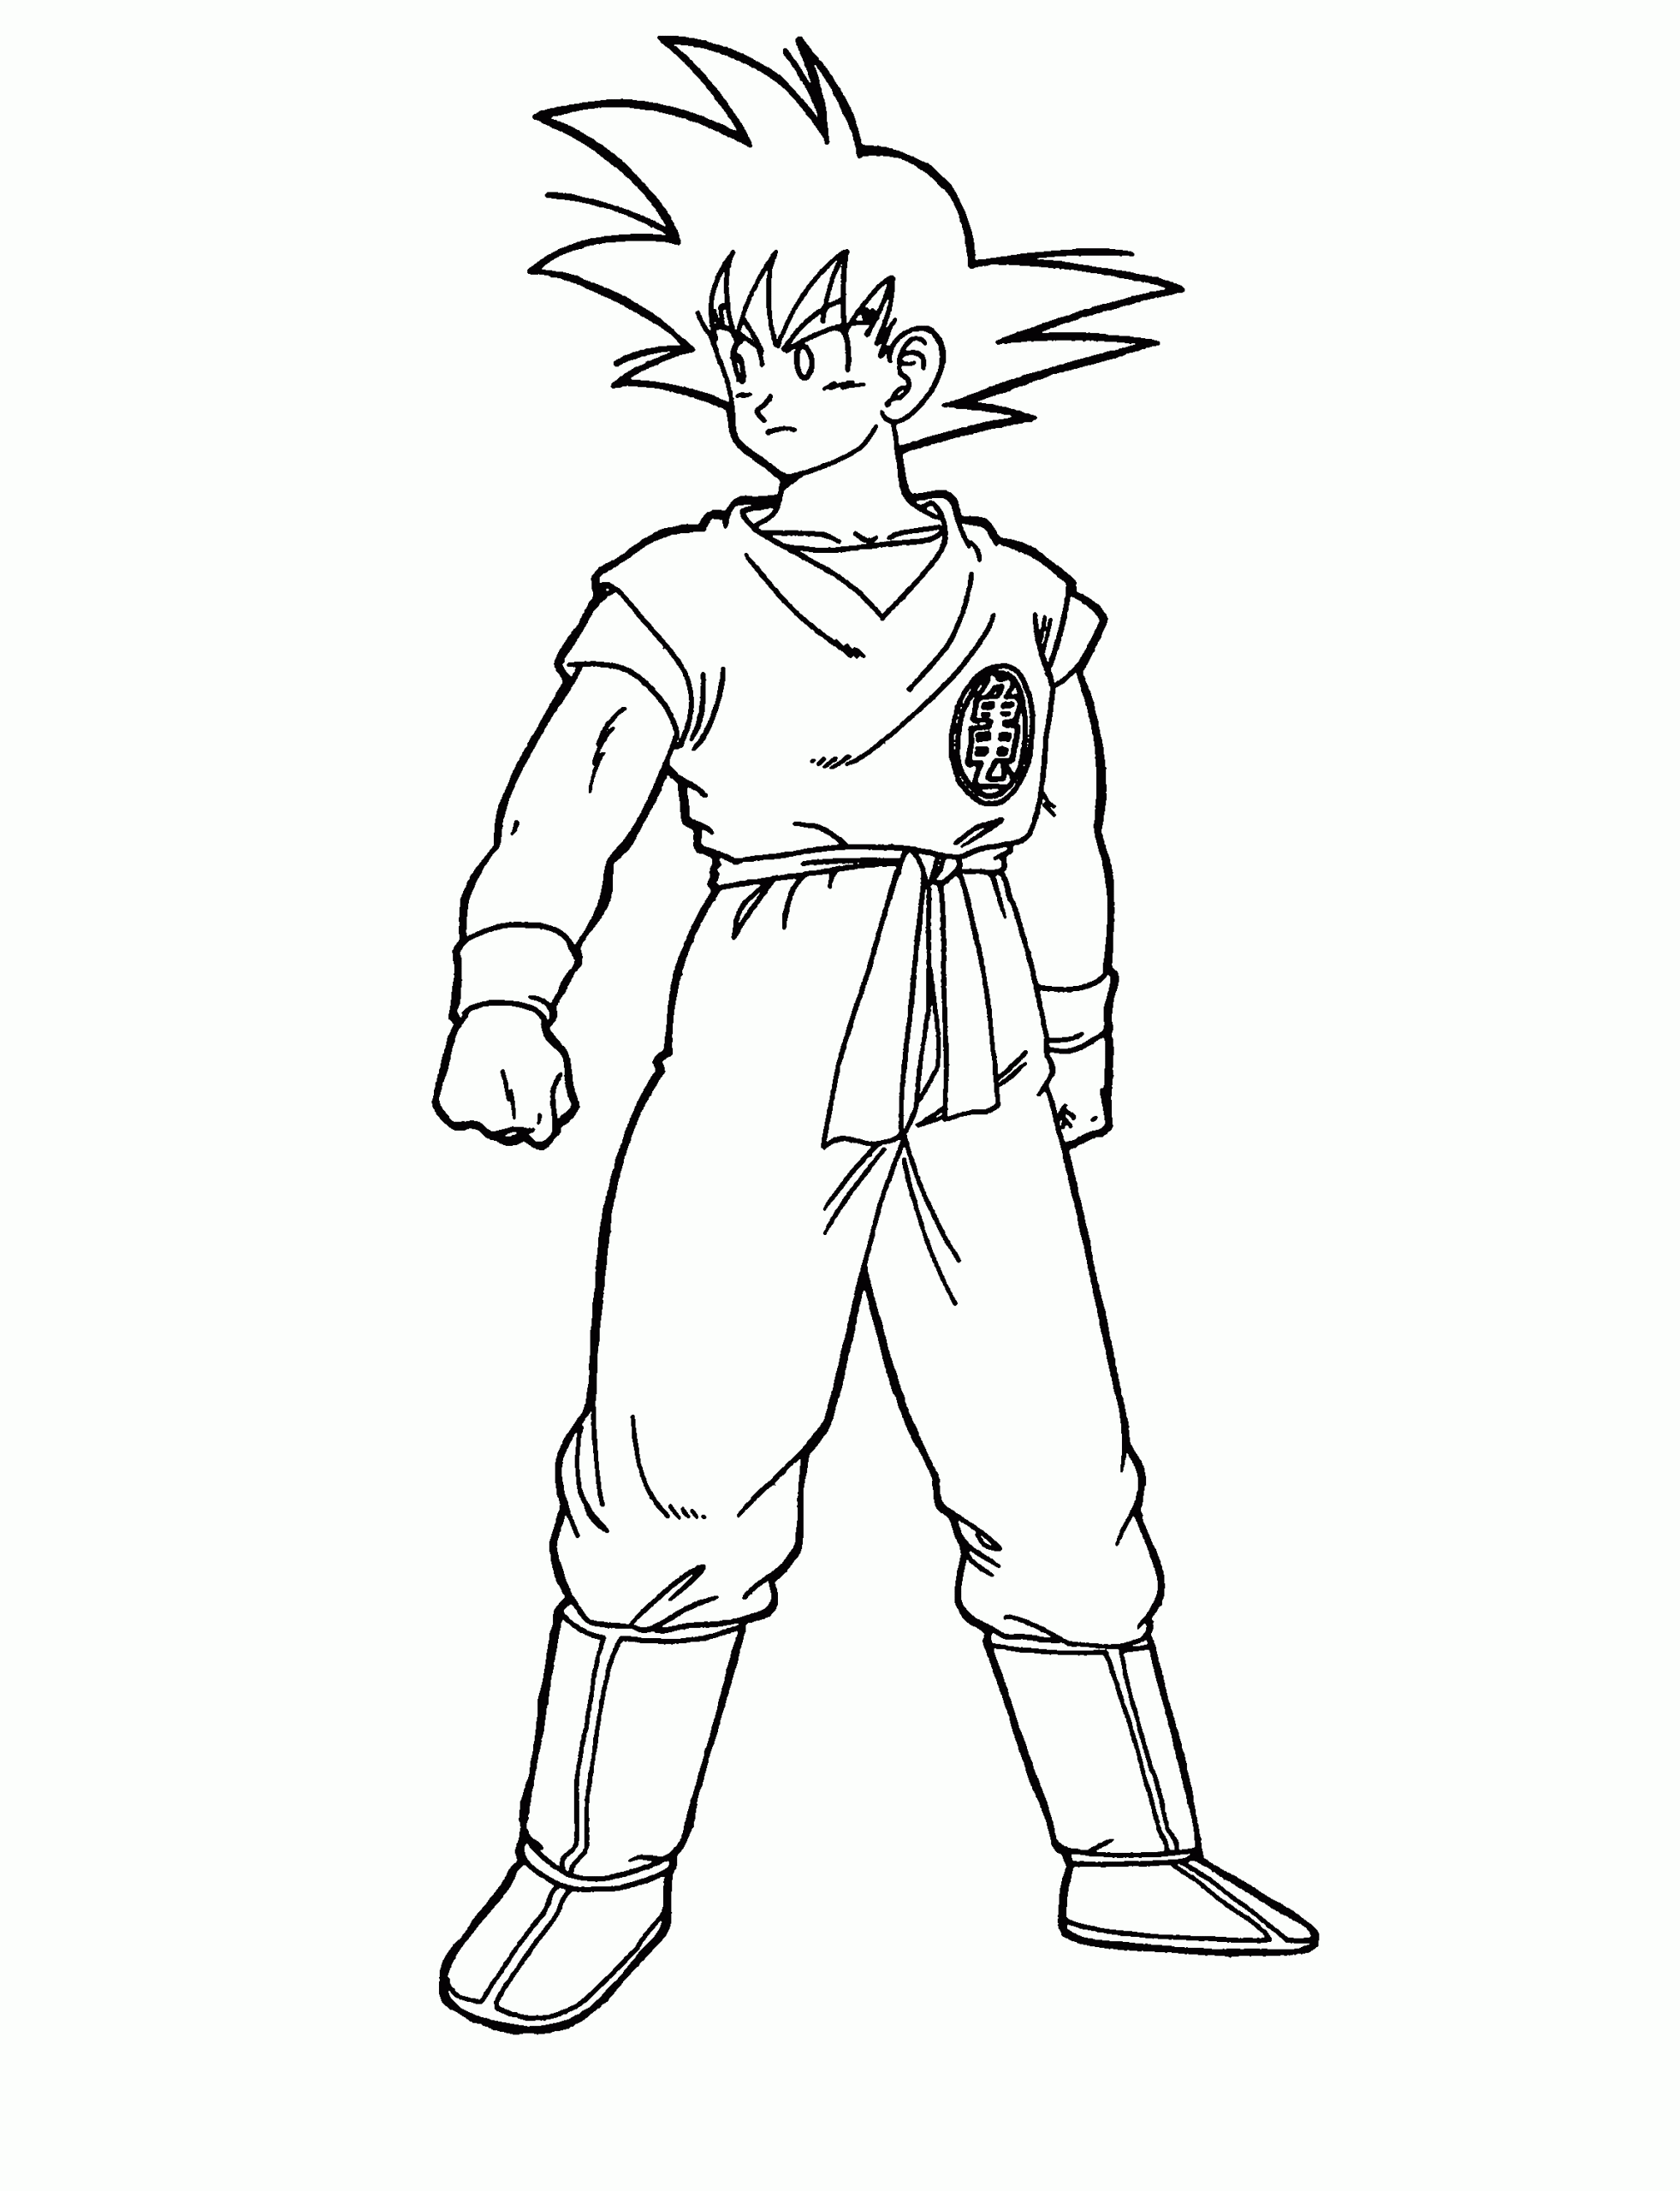 Normal Goku Coloring Page - Free Printable Coloring Pages for Kids